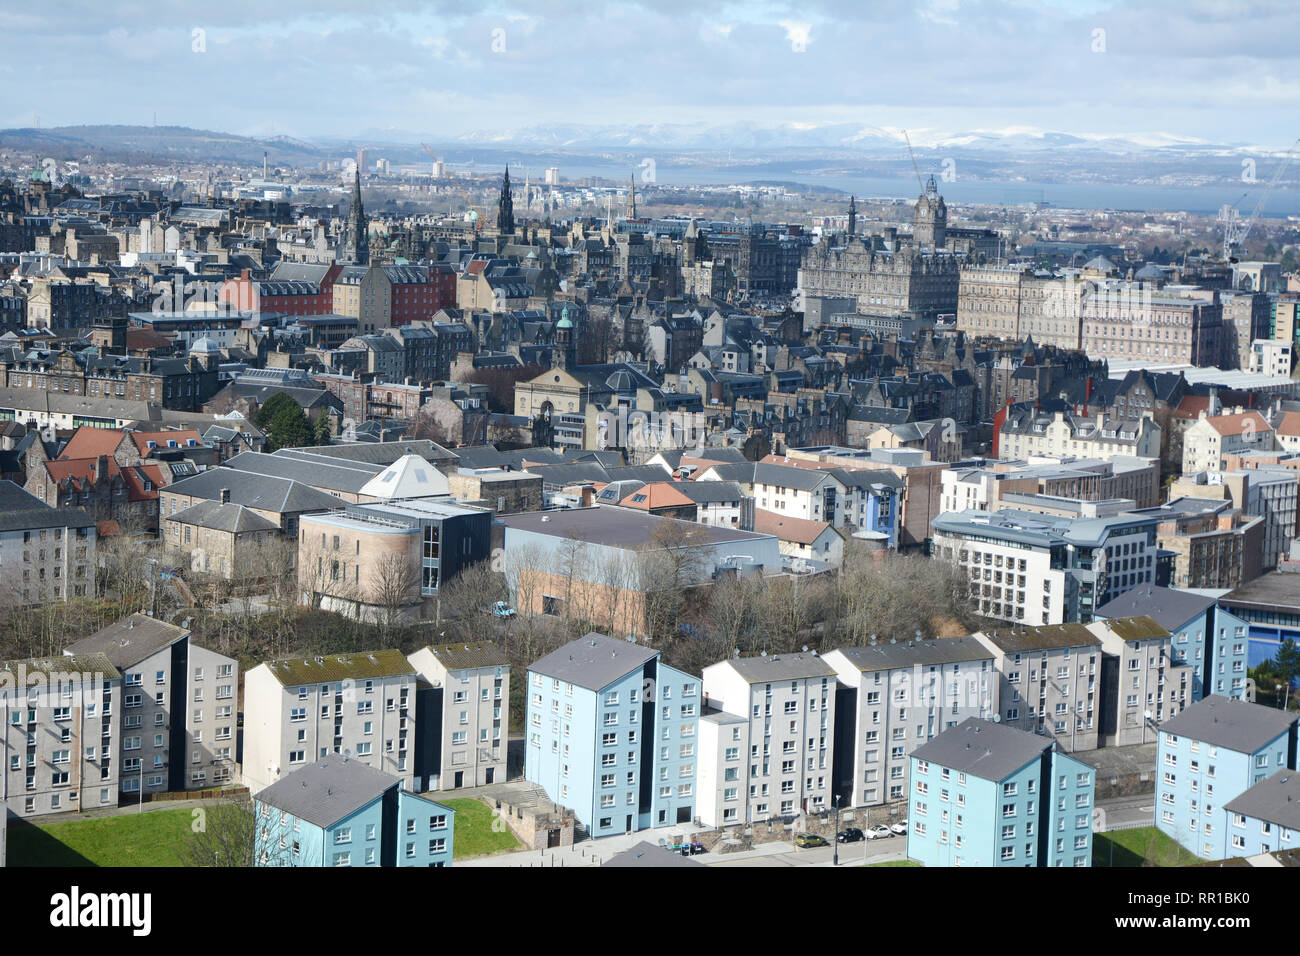 A cityscape view of the medieval old of downtown Edinburgh, and its newer outlying districts, from Arthur's Seat, Scotland, United Kingdom. Stock Photo